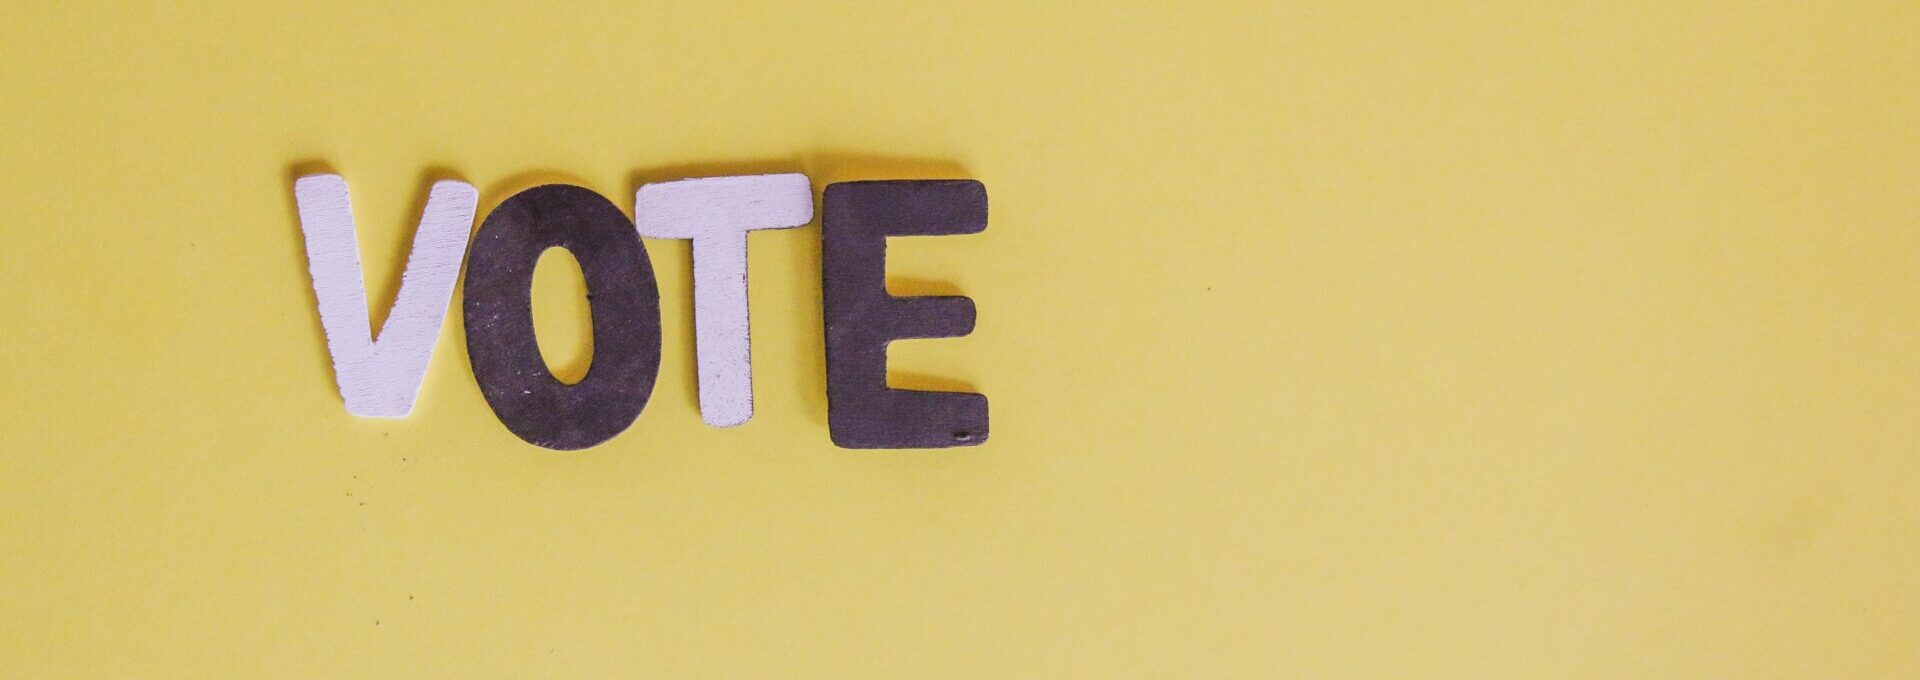 Letters that spell vote on yellow background